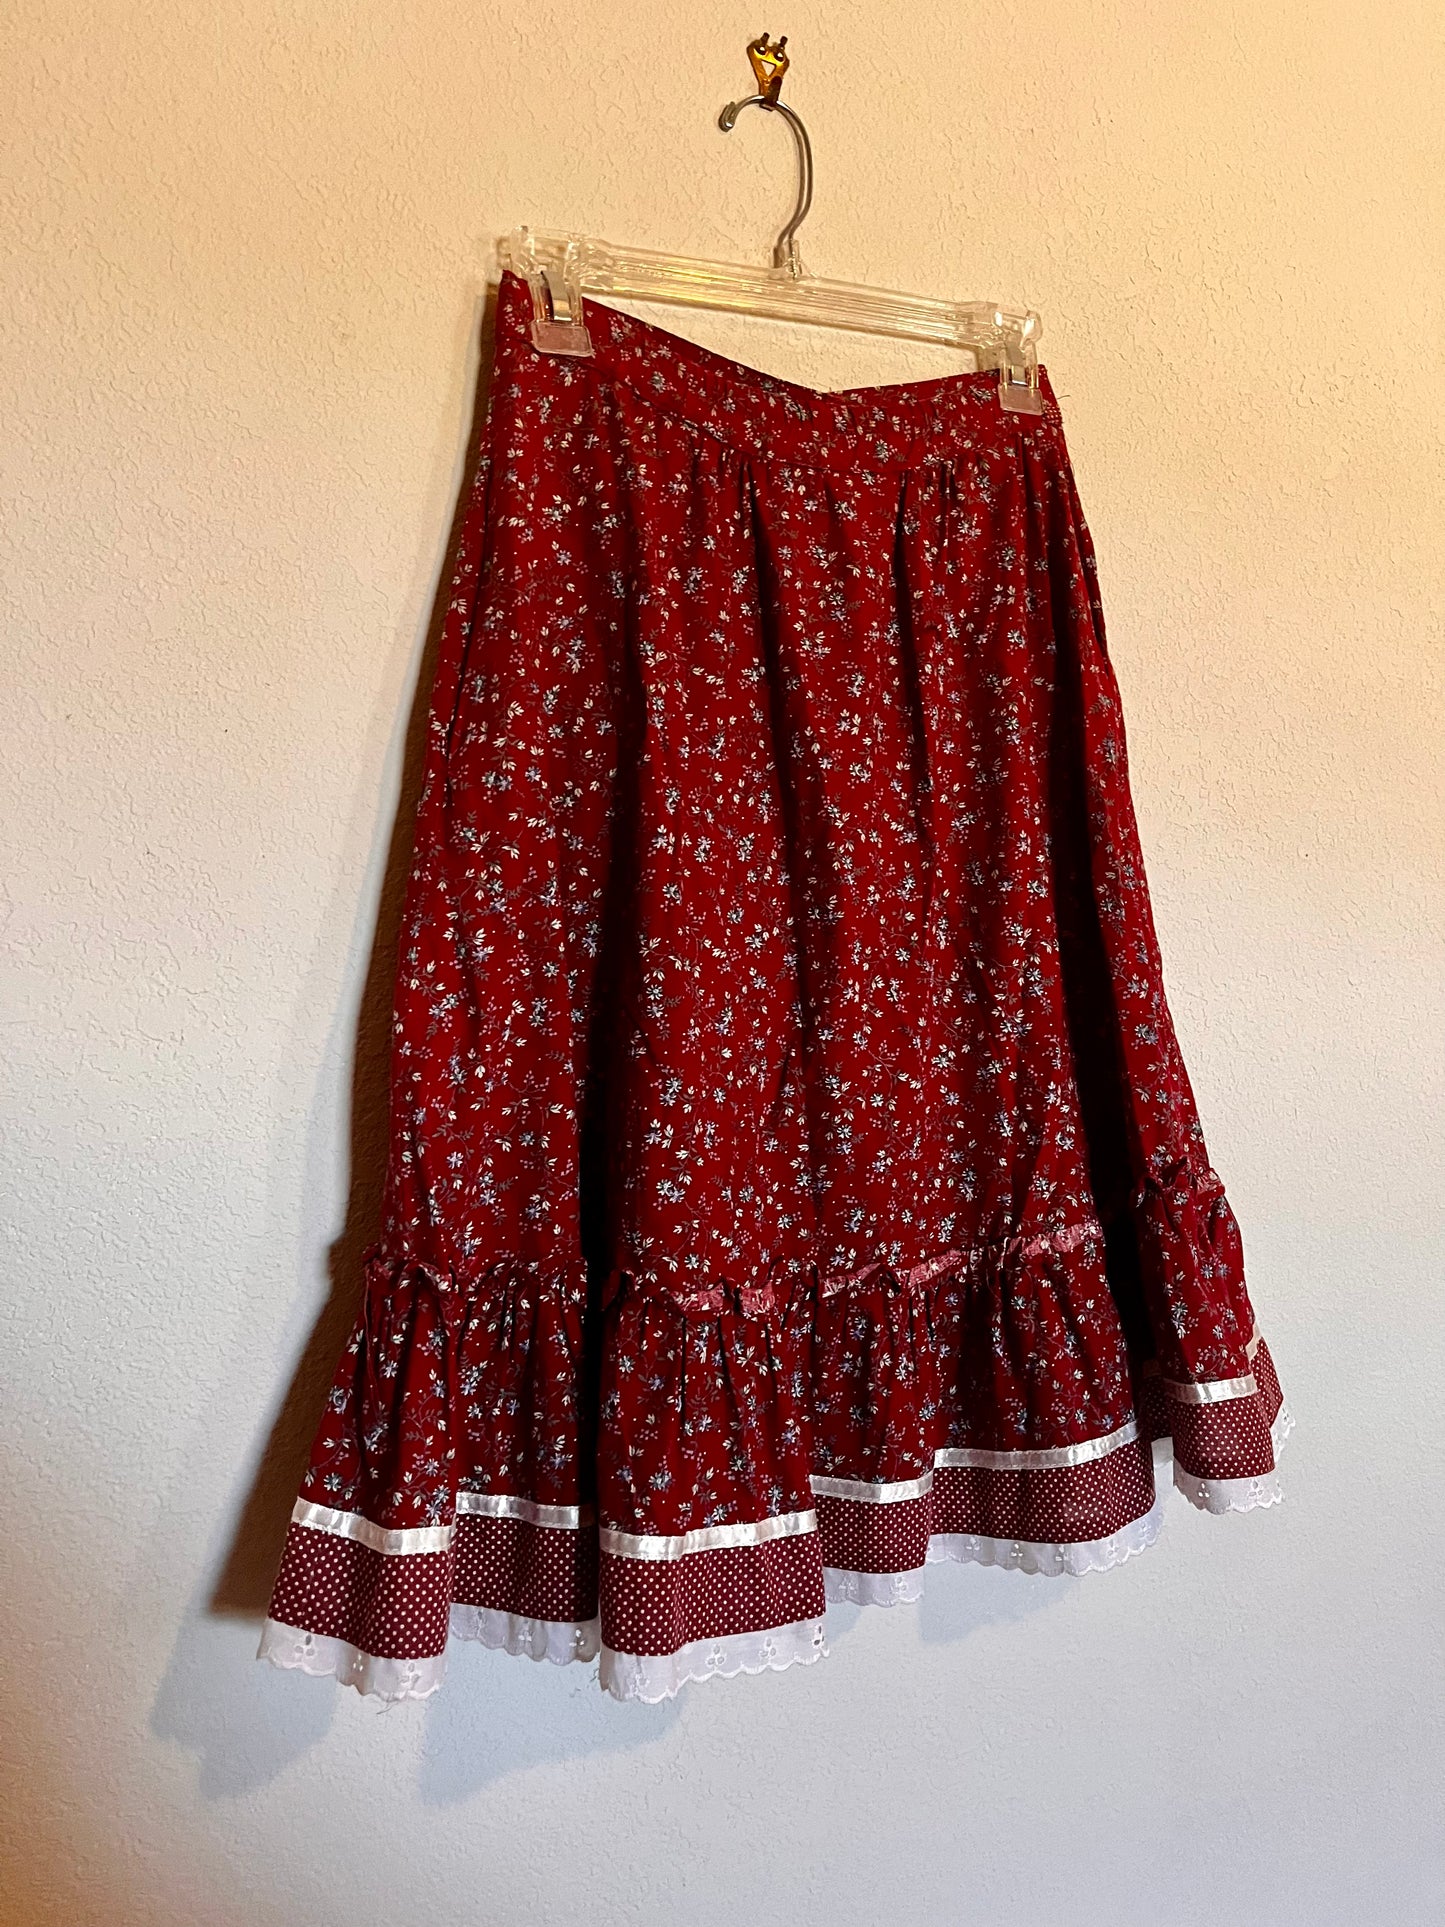 Vintage 1970’s "Gunne Sax by Jessica McClintock" (Jeunes filles) Red Calico Skirt